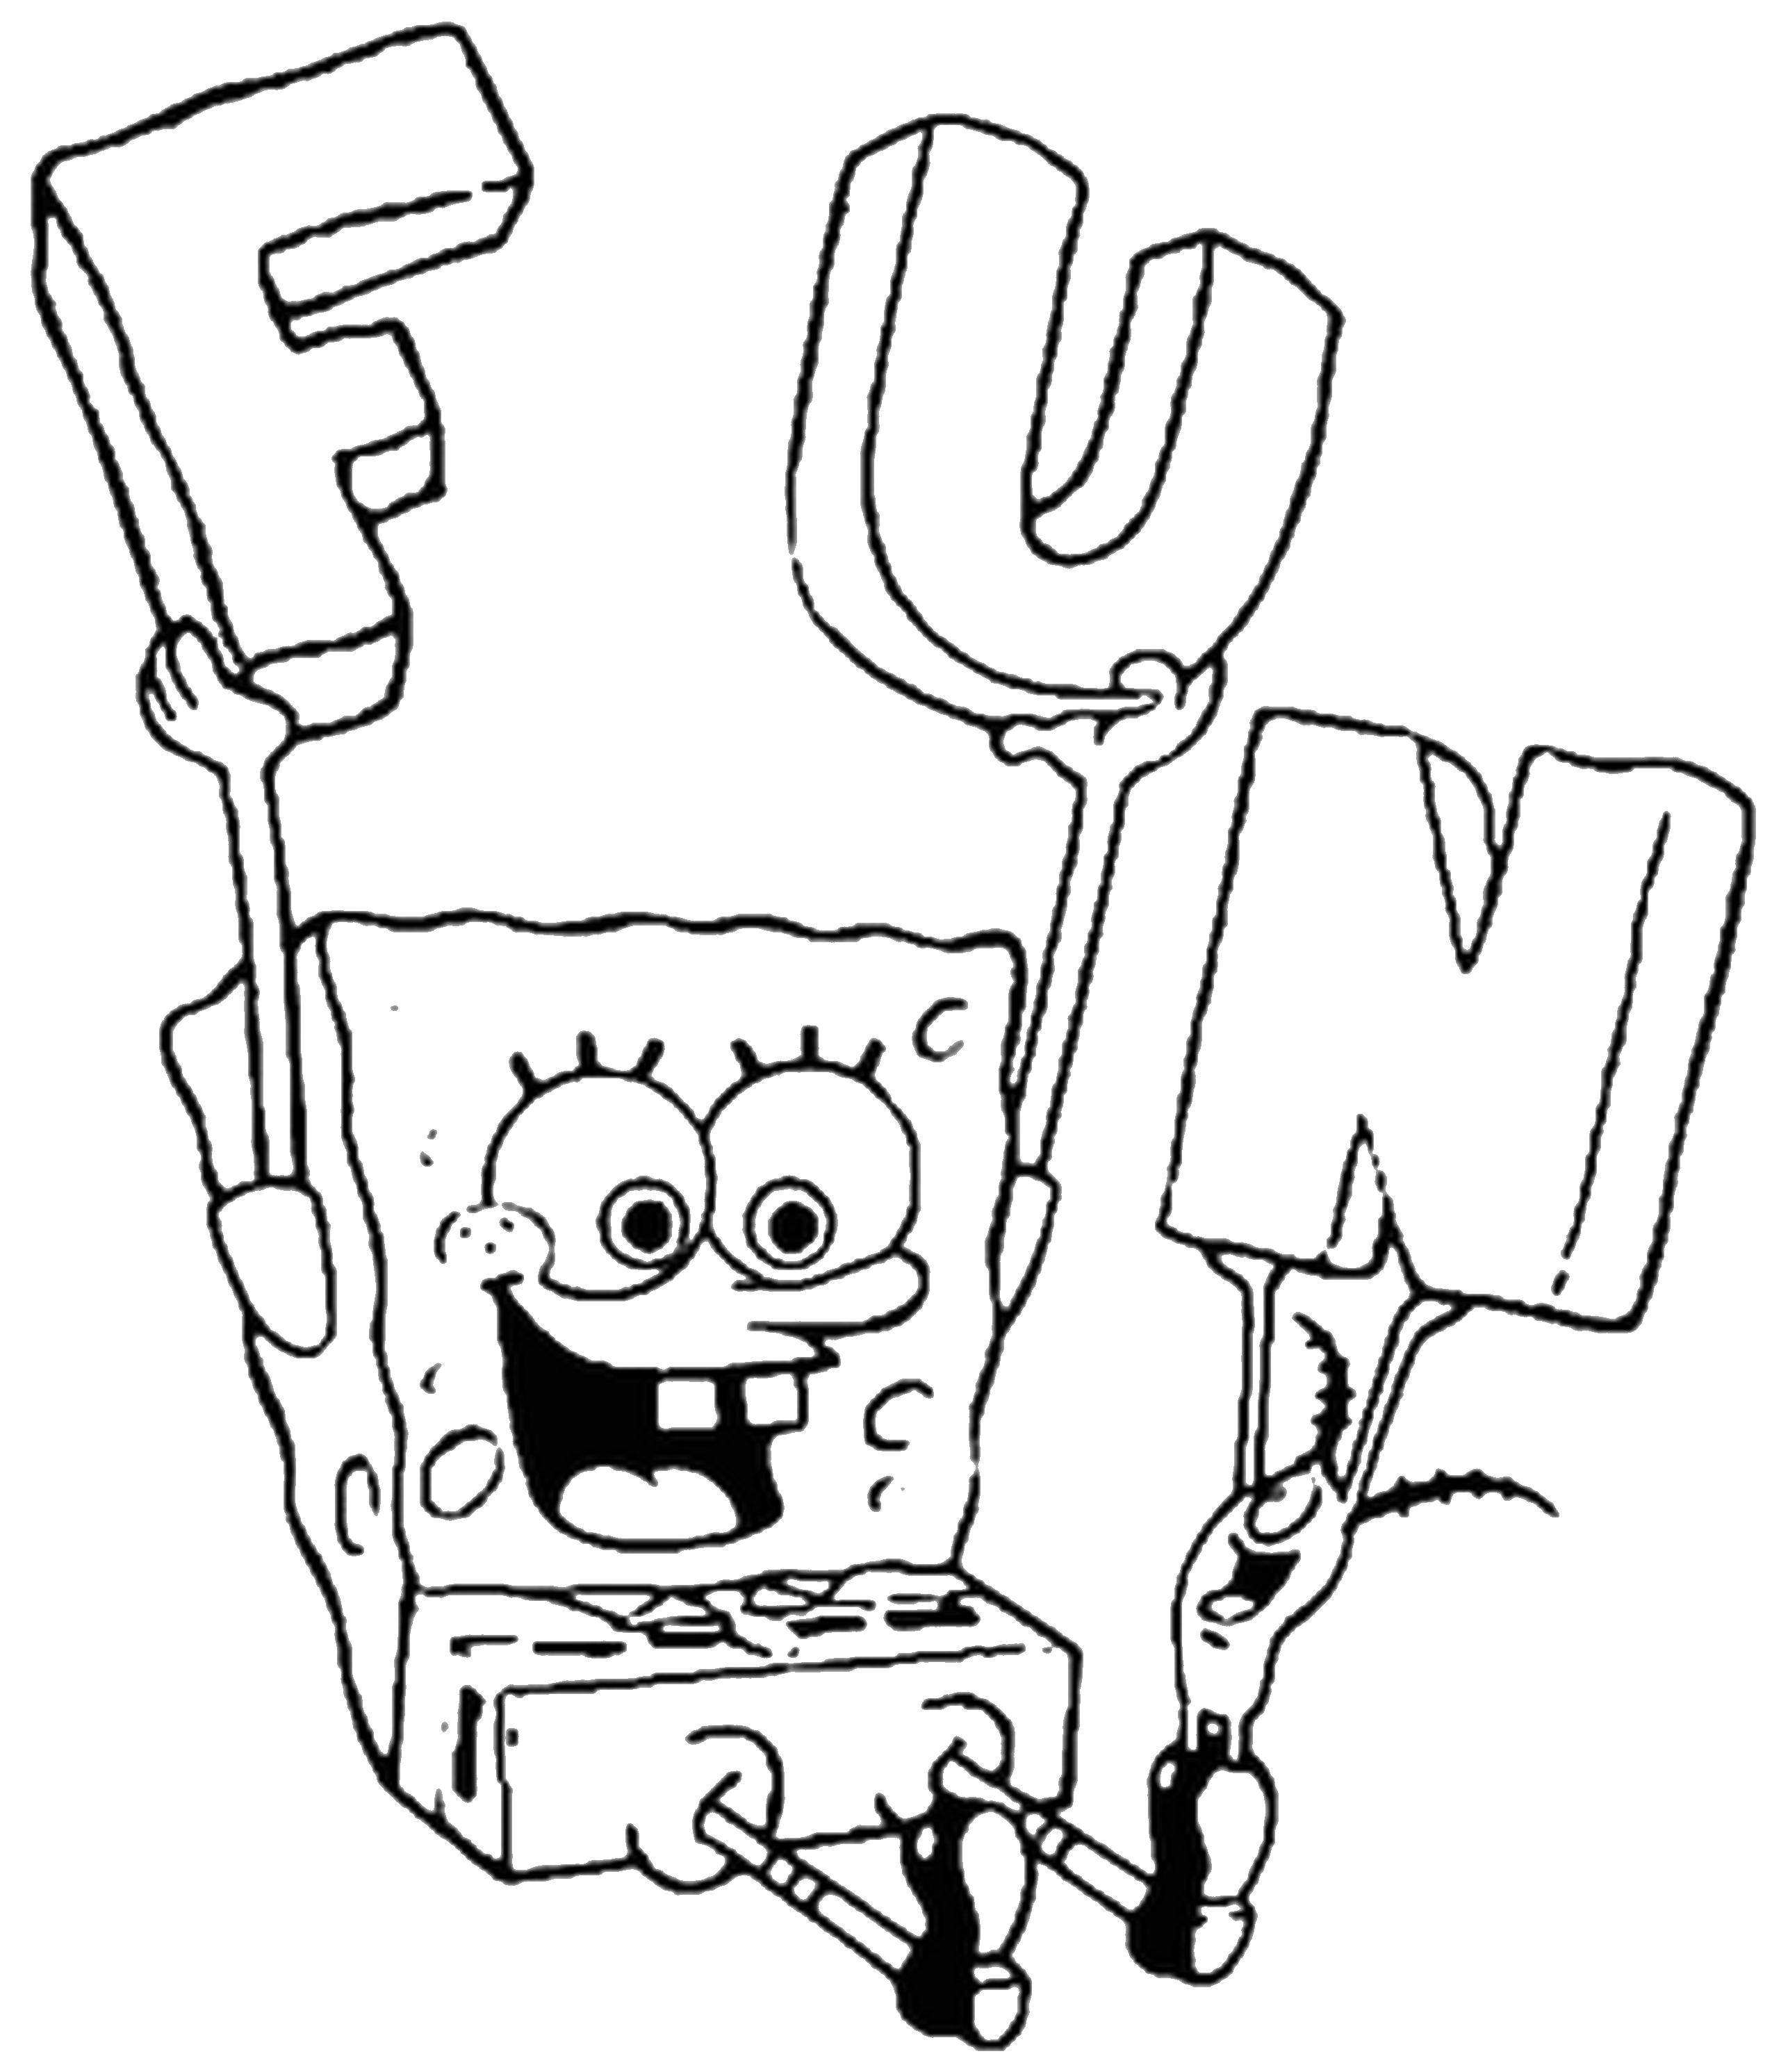 Coloring Spongebob and plankton. Category Spongebob. Tags:  cartoons, Plankton, spongebob.